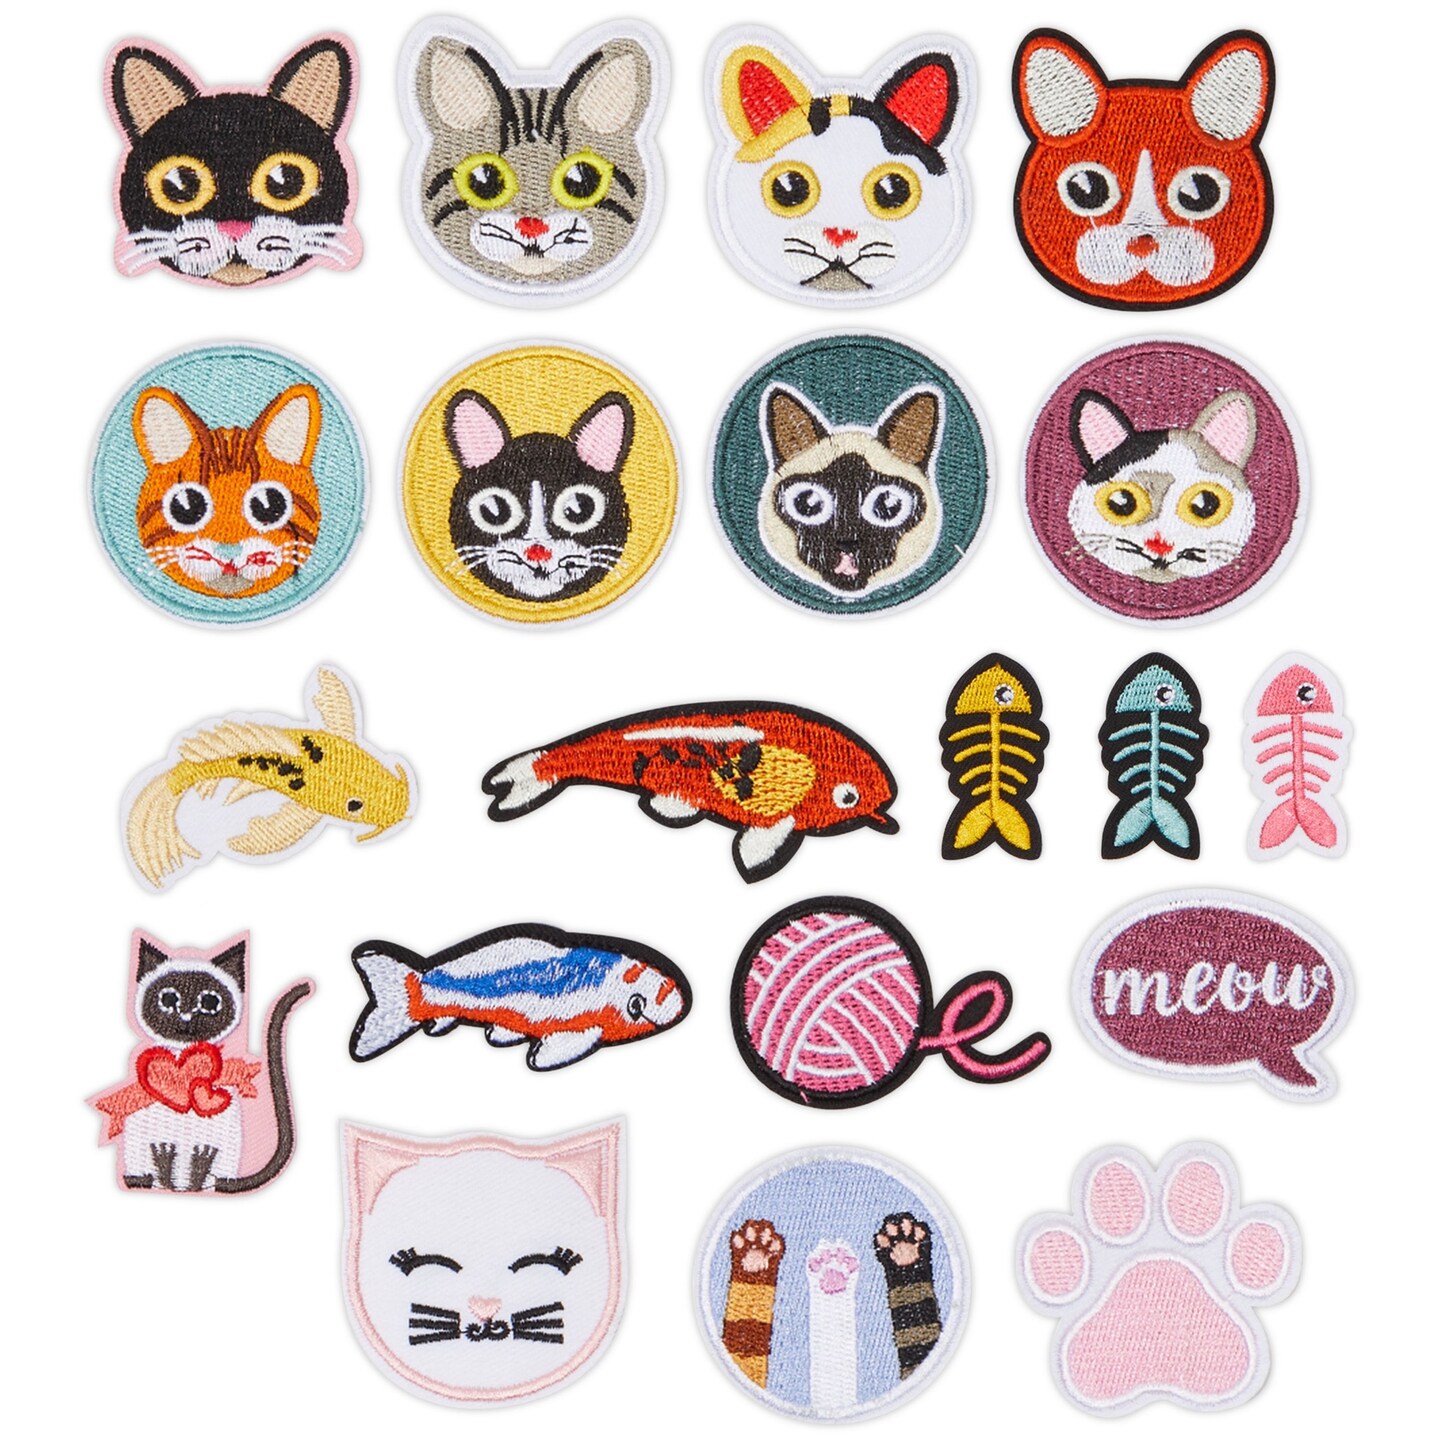 Assorted Iron On Patches for Clothing, Embroidering (30 Pieces